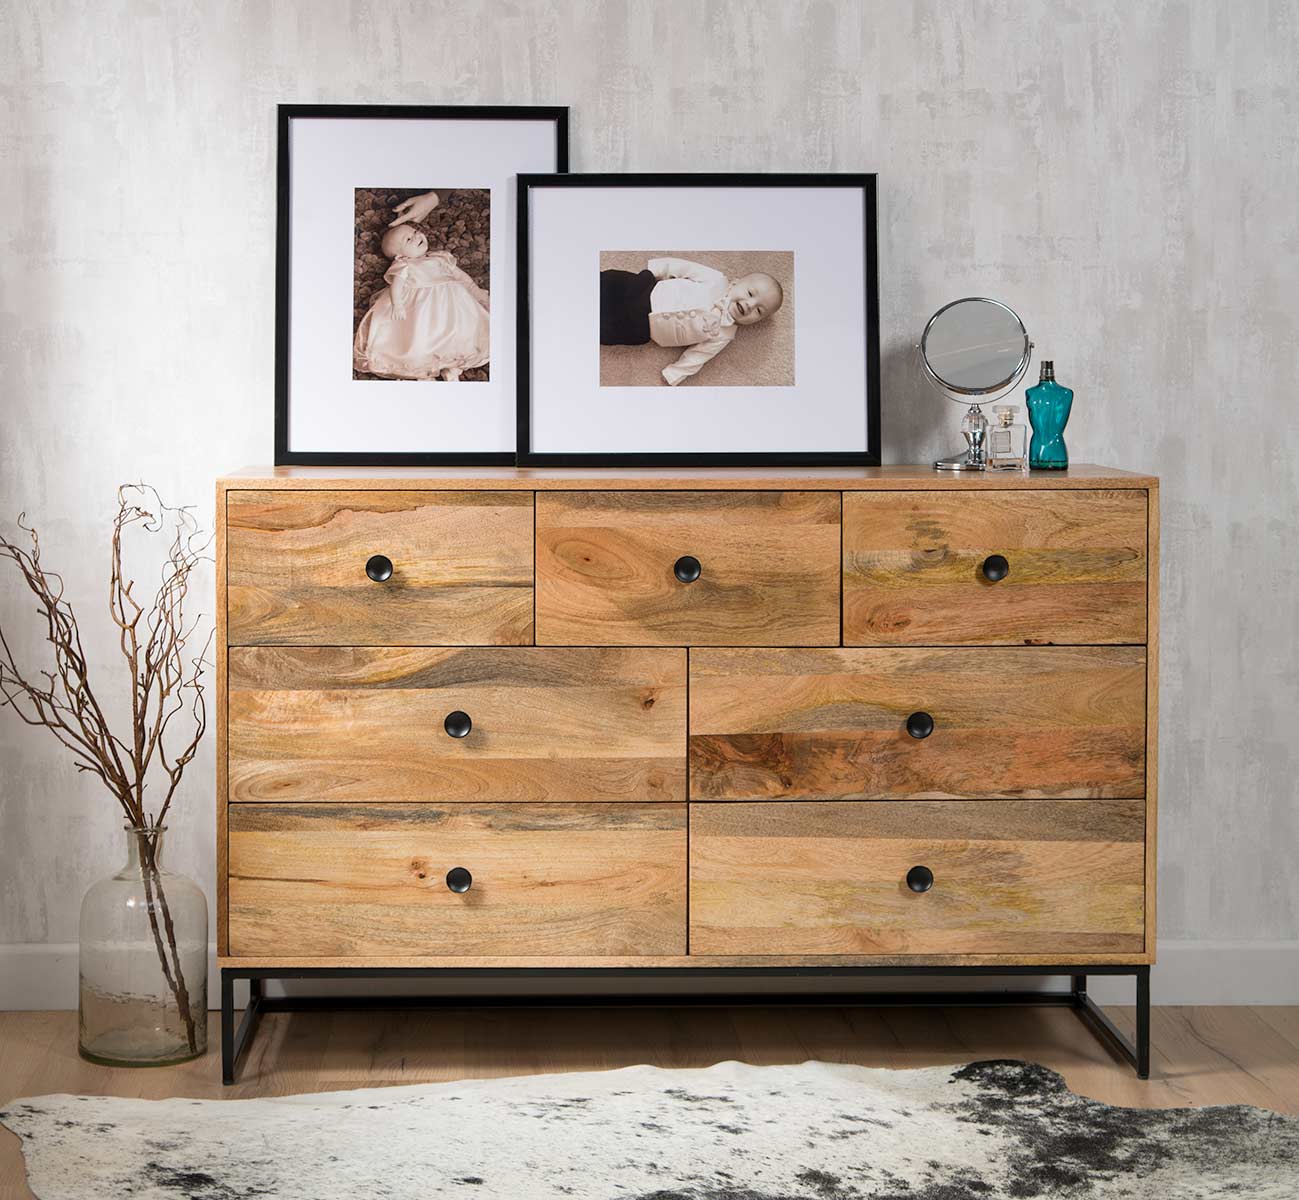 Wooden Chests of Drawers - Reclaimed Wood